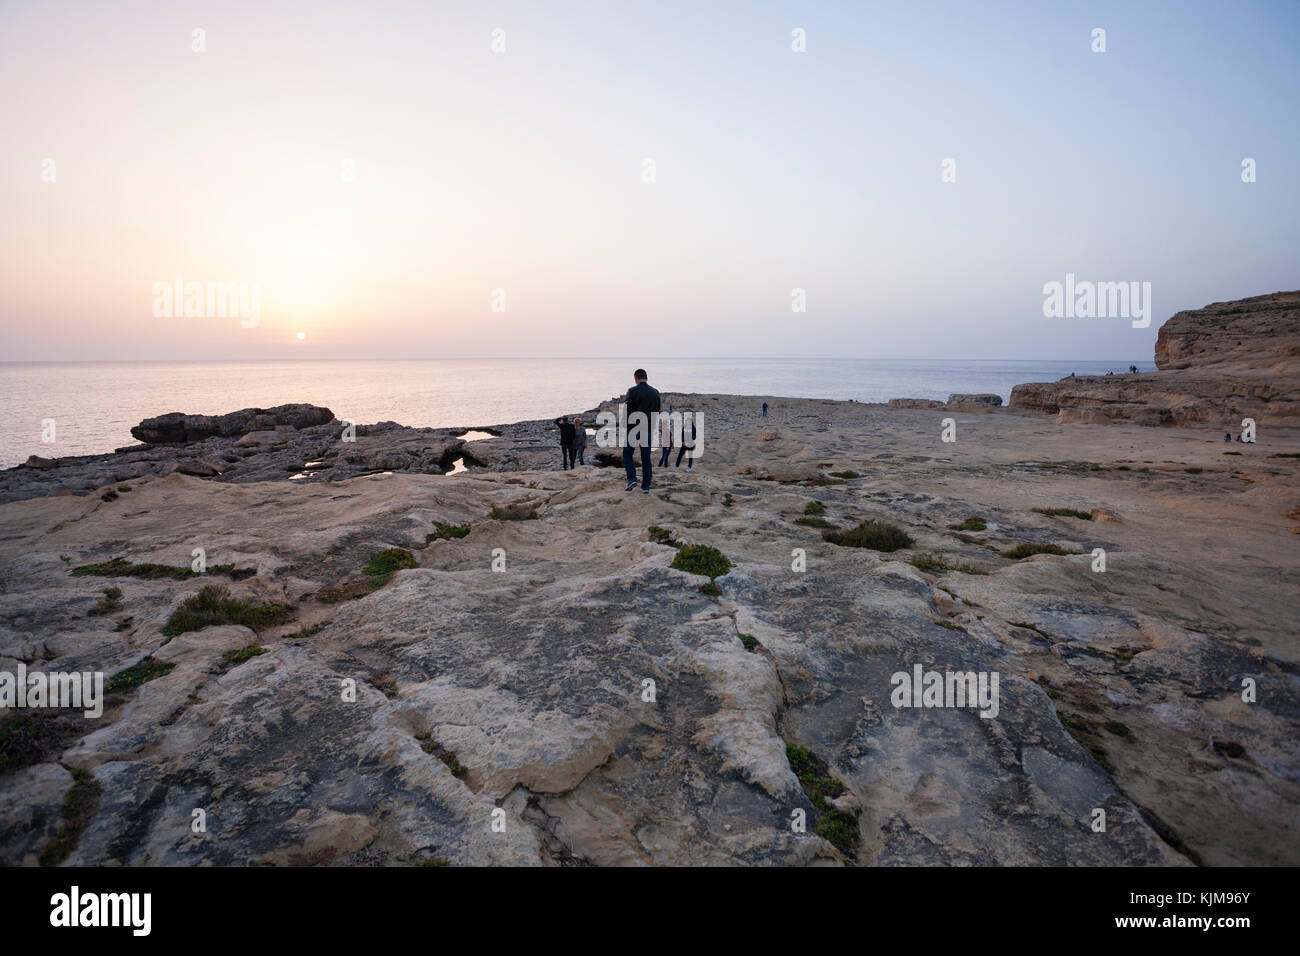 People walking at the sunset hour at Dwejra Bay, looking at sea, with rocky shore foreground. Stock Photo